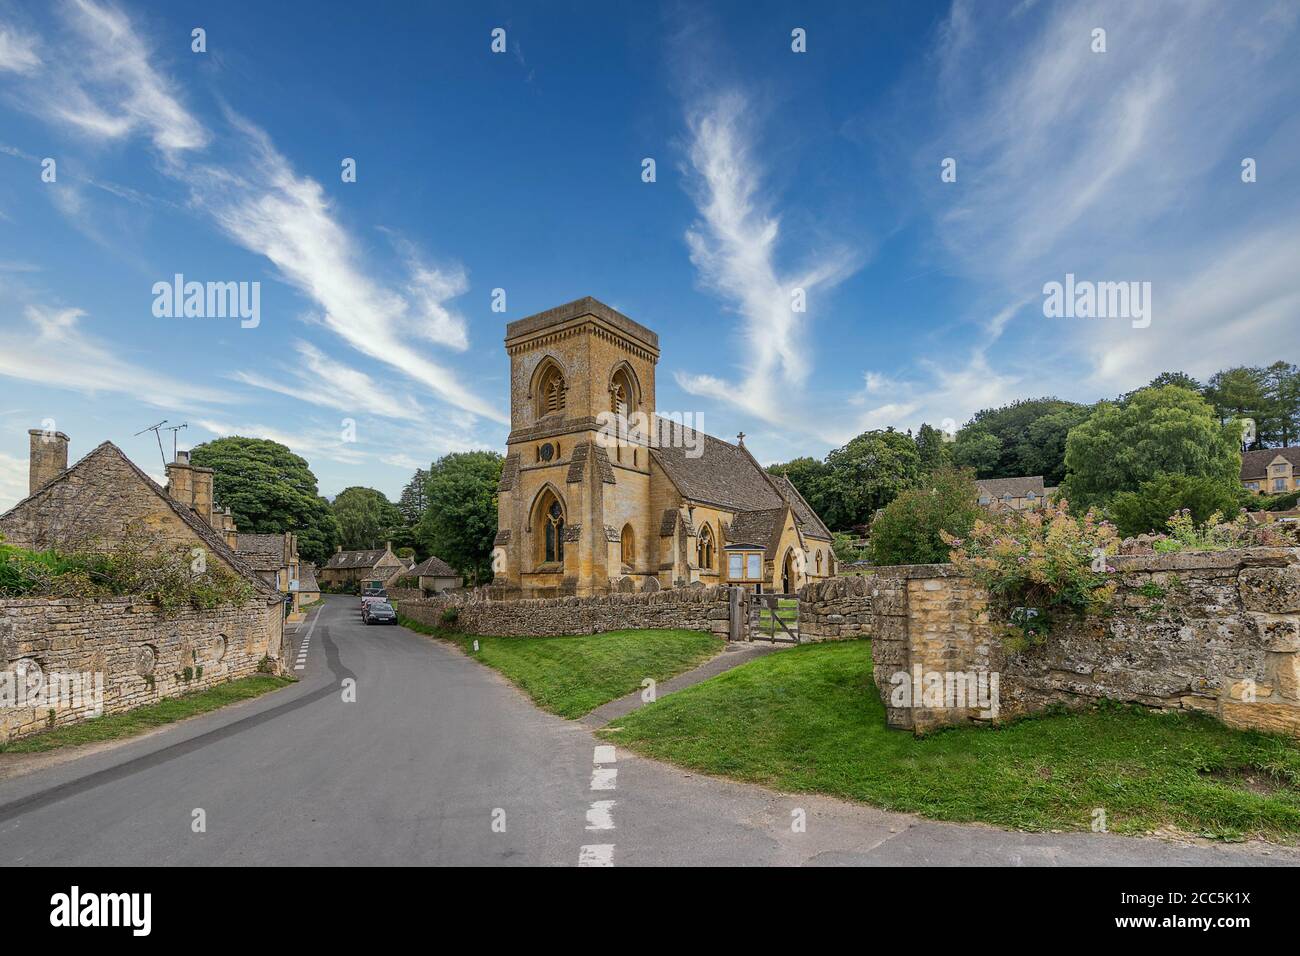 Snowshill nelle Cotswolds Foto Stock